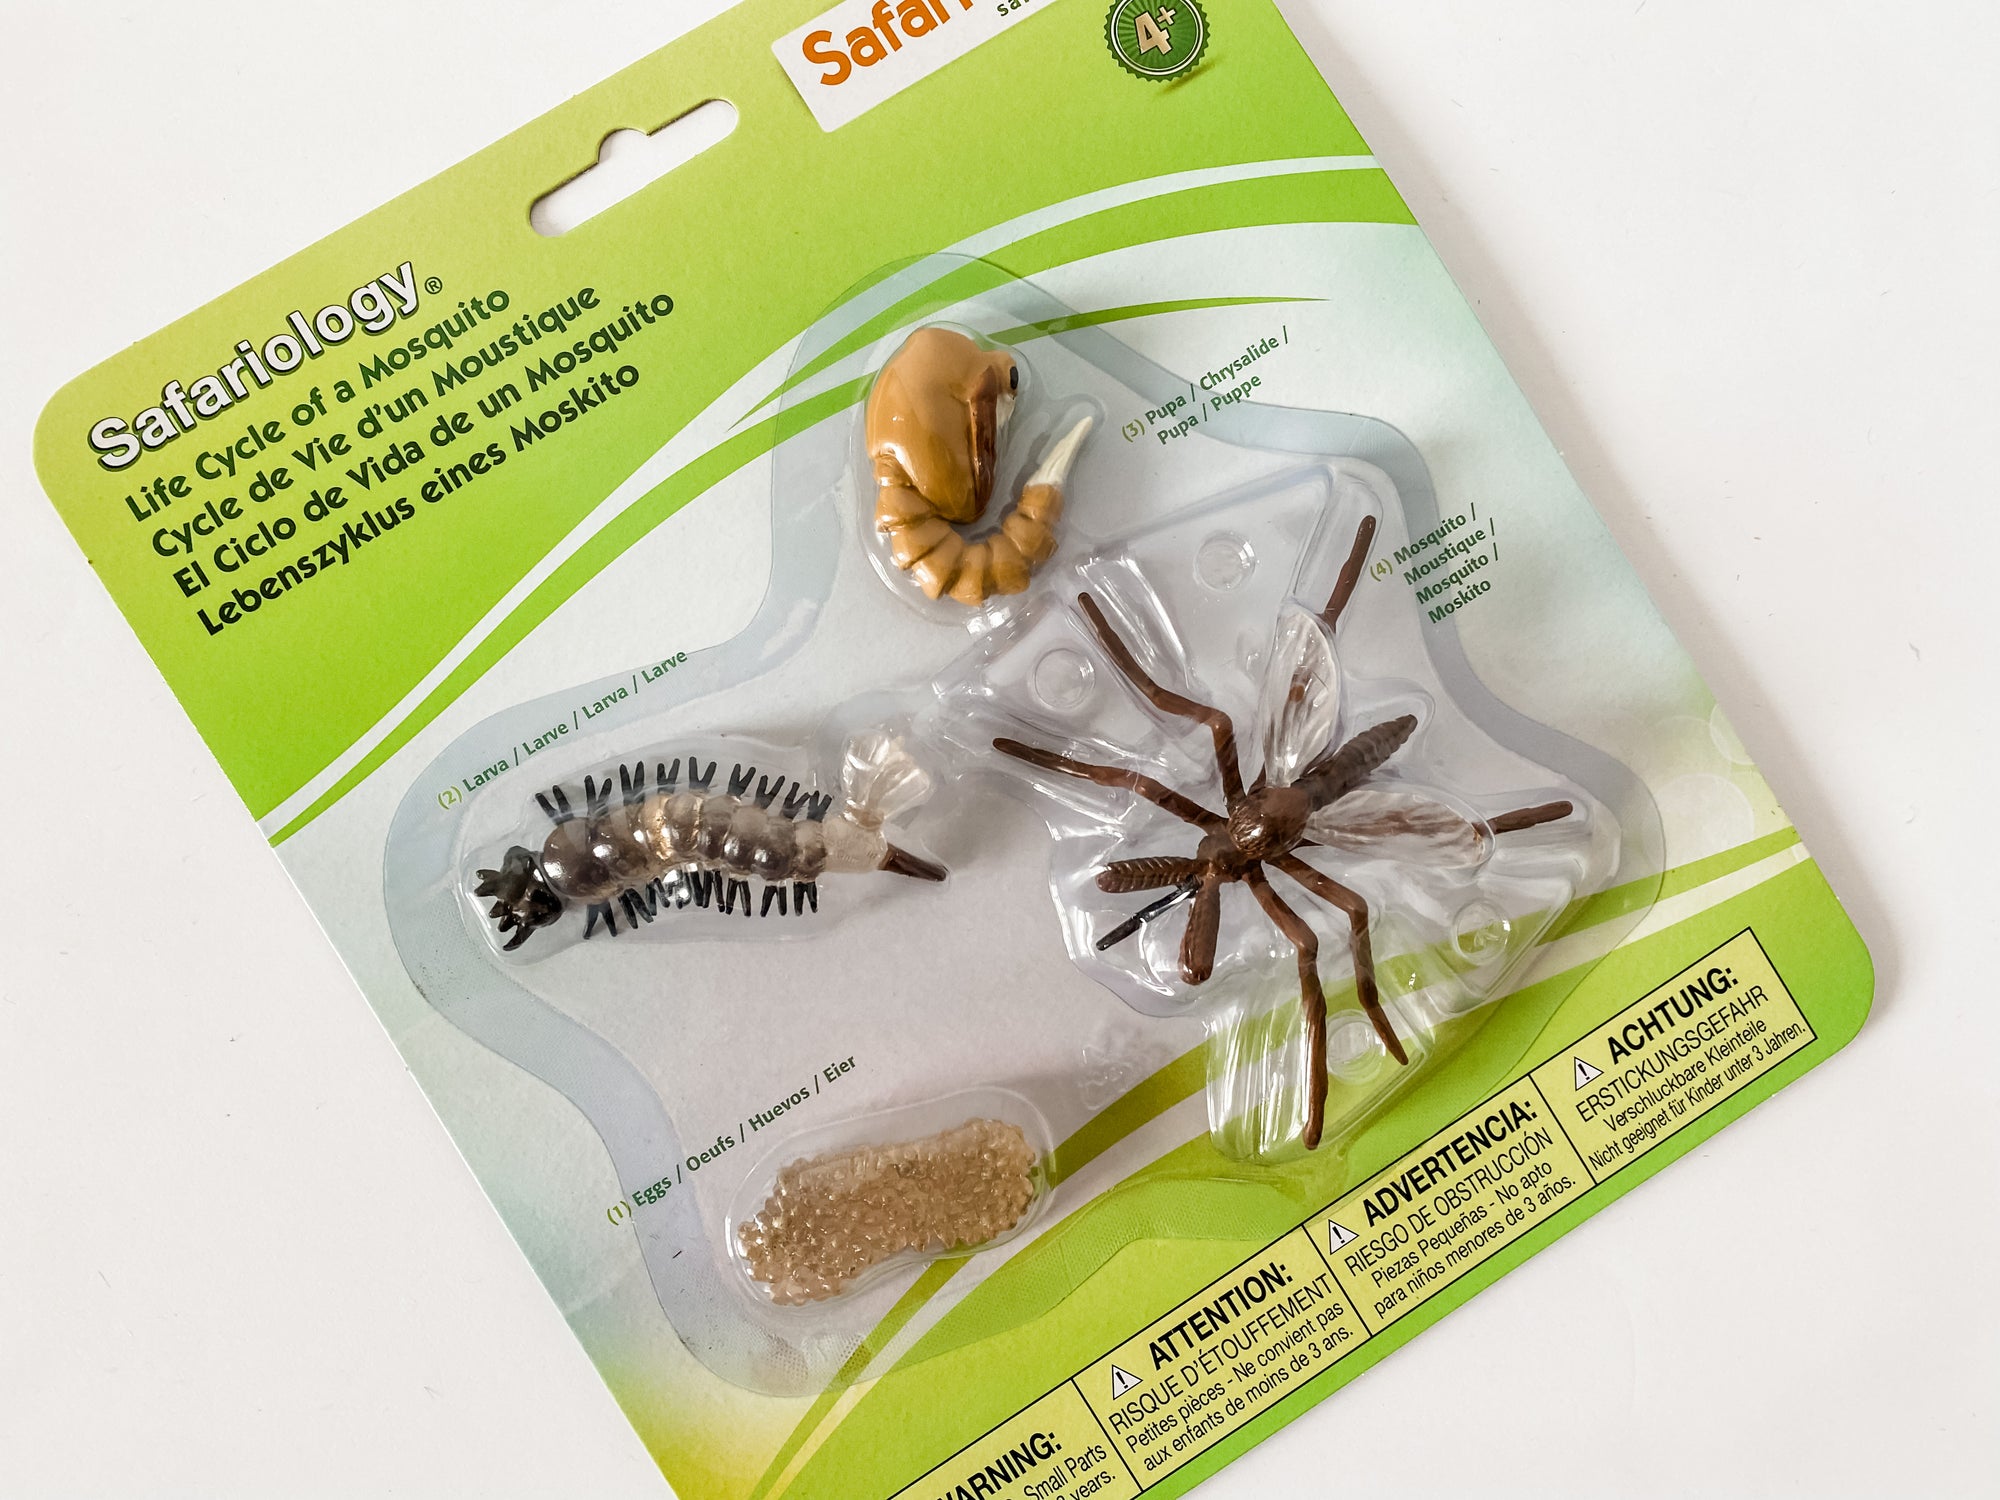 Mosquito Life Cycle Figurines